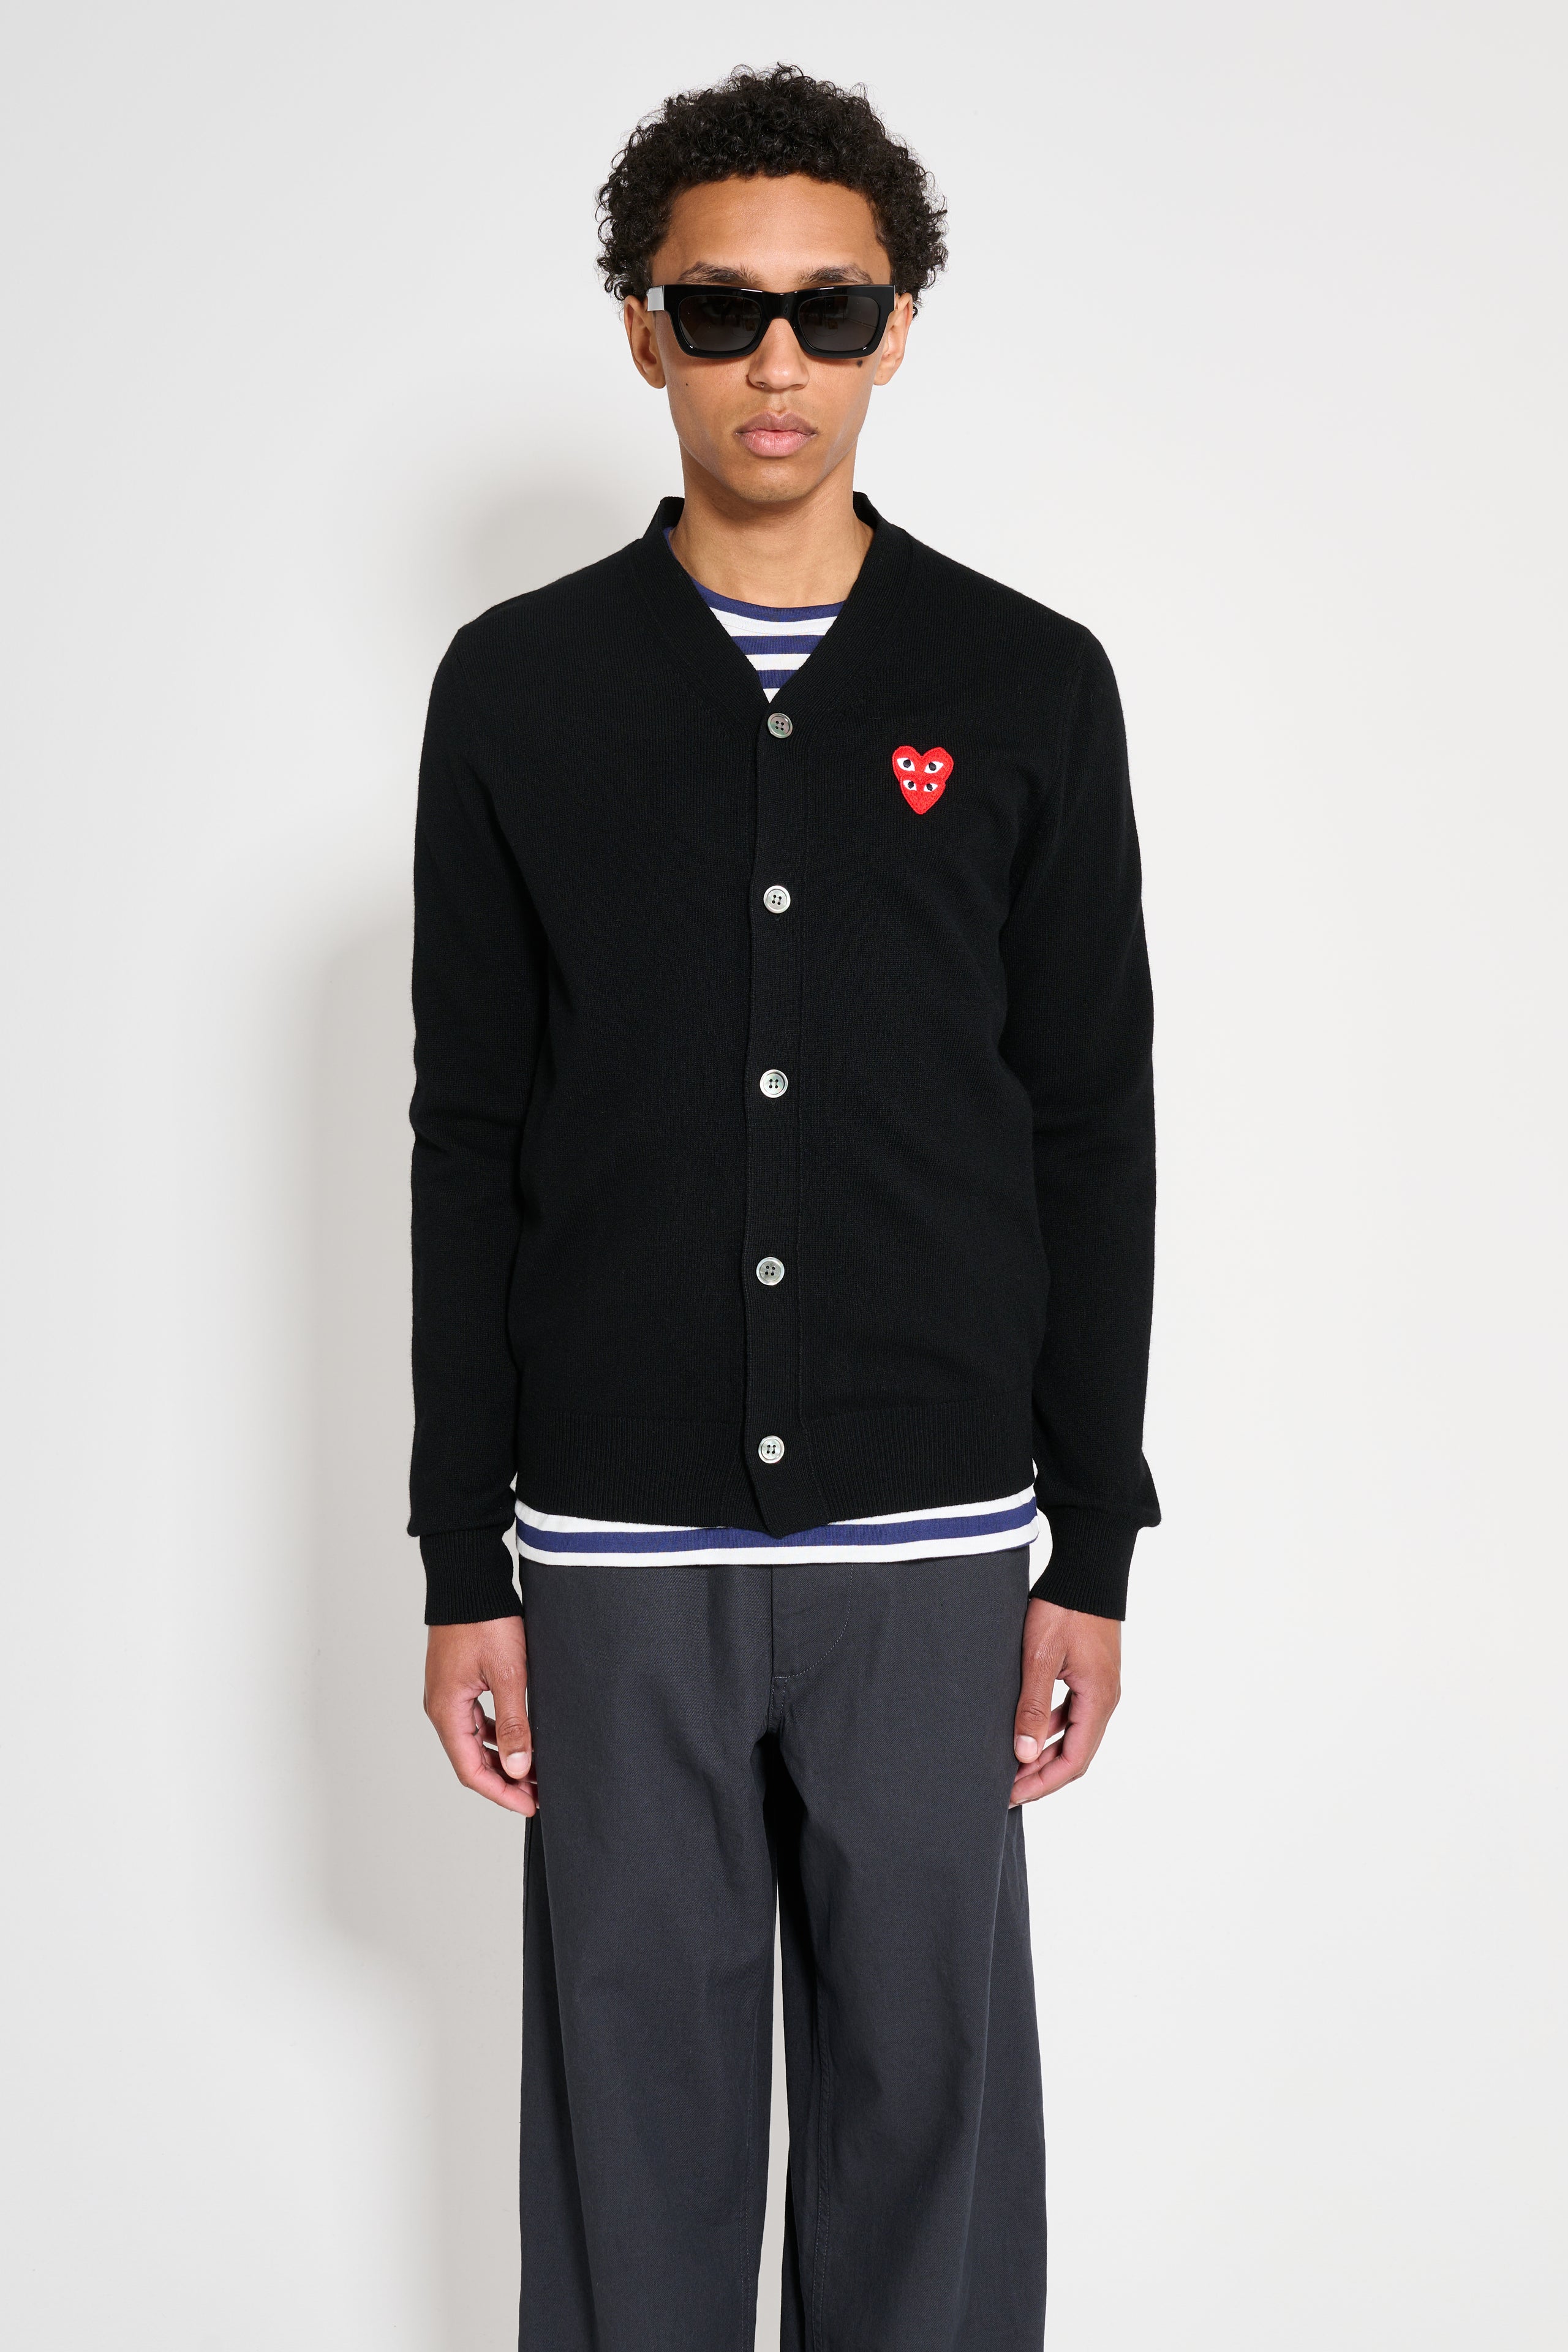 Comme des Garçons Play Double Heart Knitted Cardigan Black